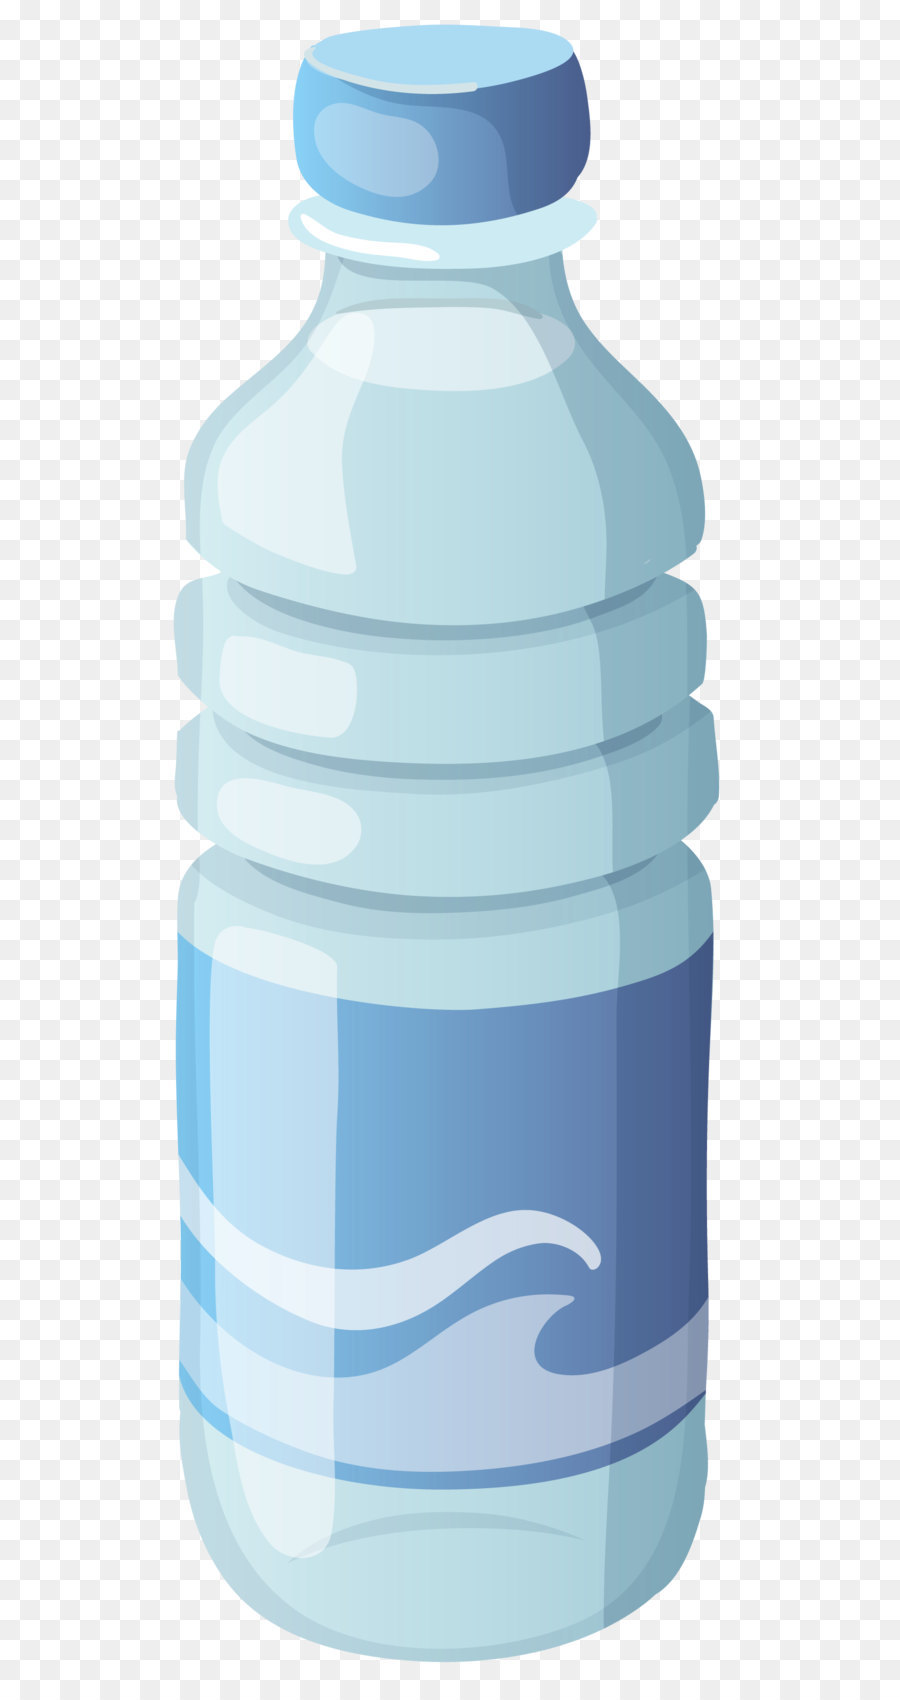 Water bottle Bottled water Clip art - Small Mineral Water Bottle PNG Clipart Image png download - 1272*3305 - Free Transparent Water Bottles png Download.